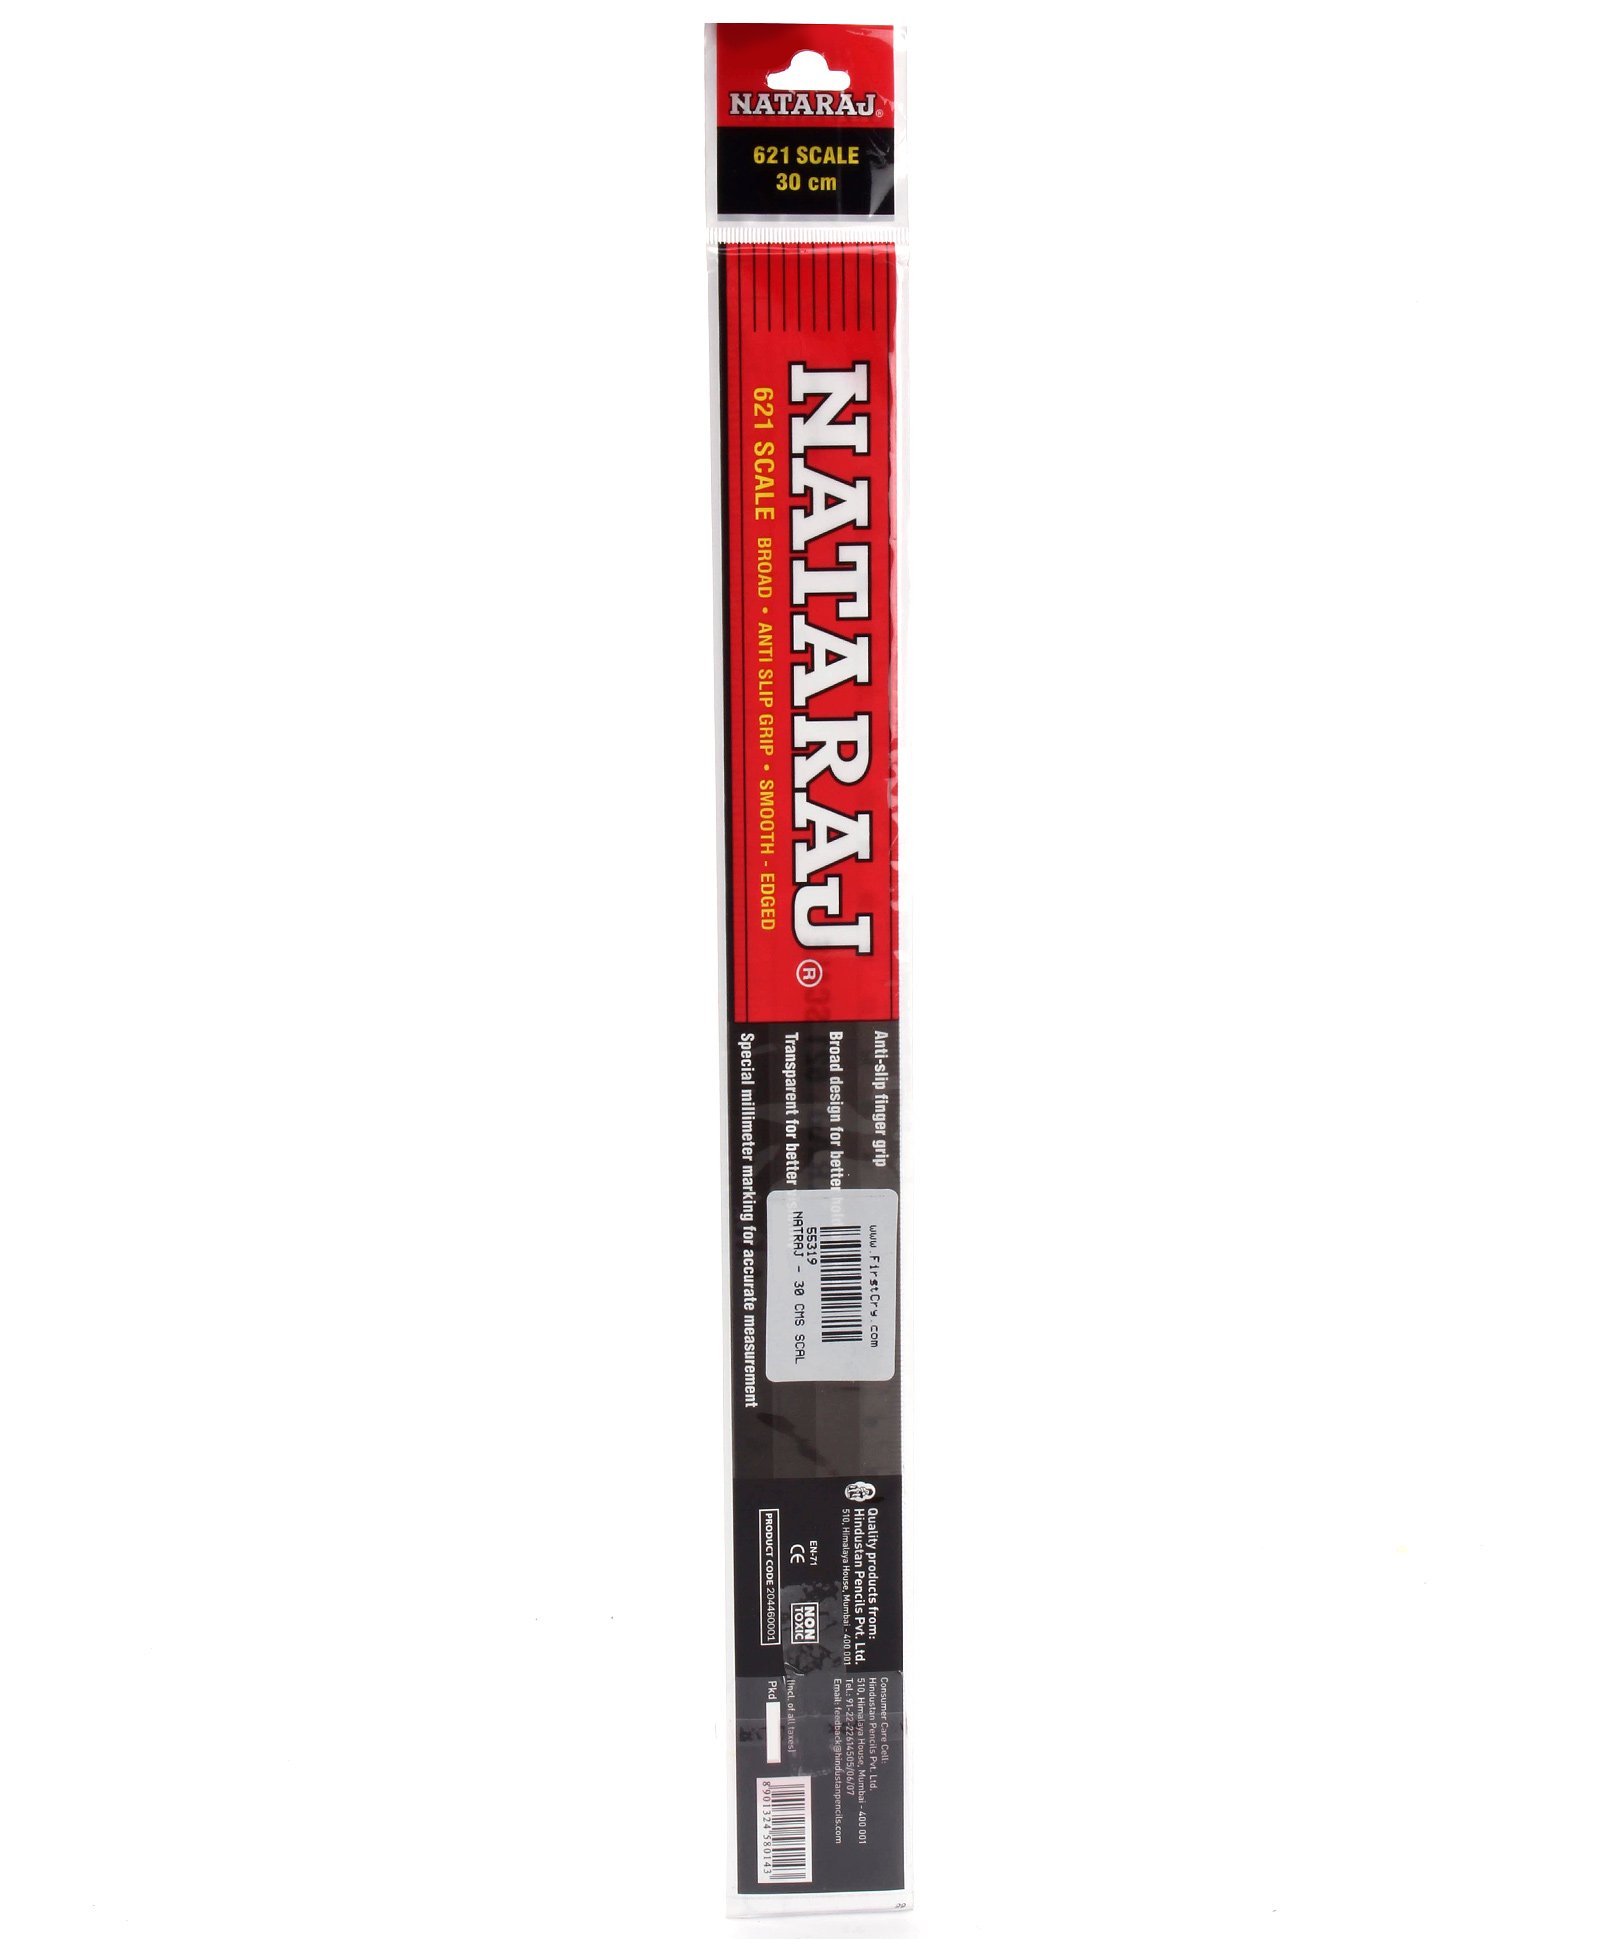 Nataraj 30 Cm Scale Online In India Buy At Best Price From Firstcry Com